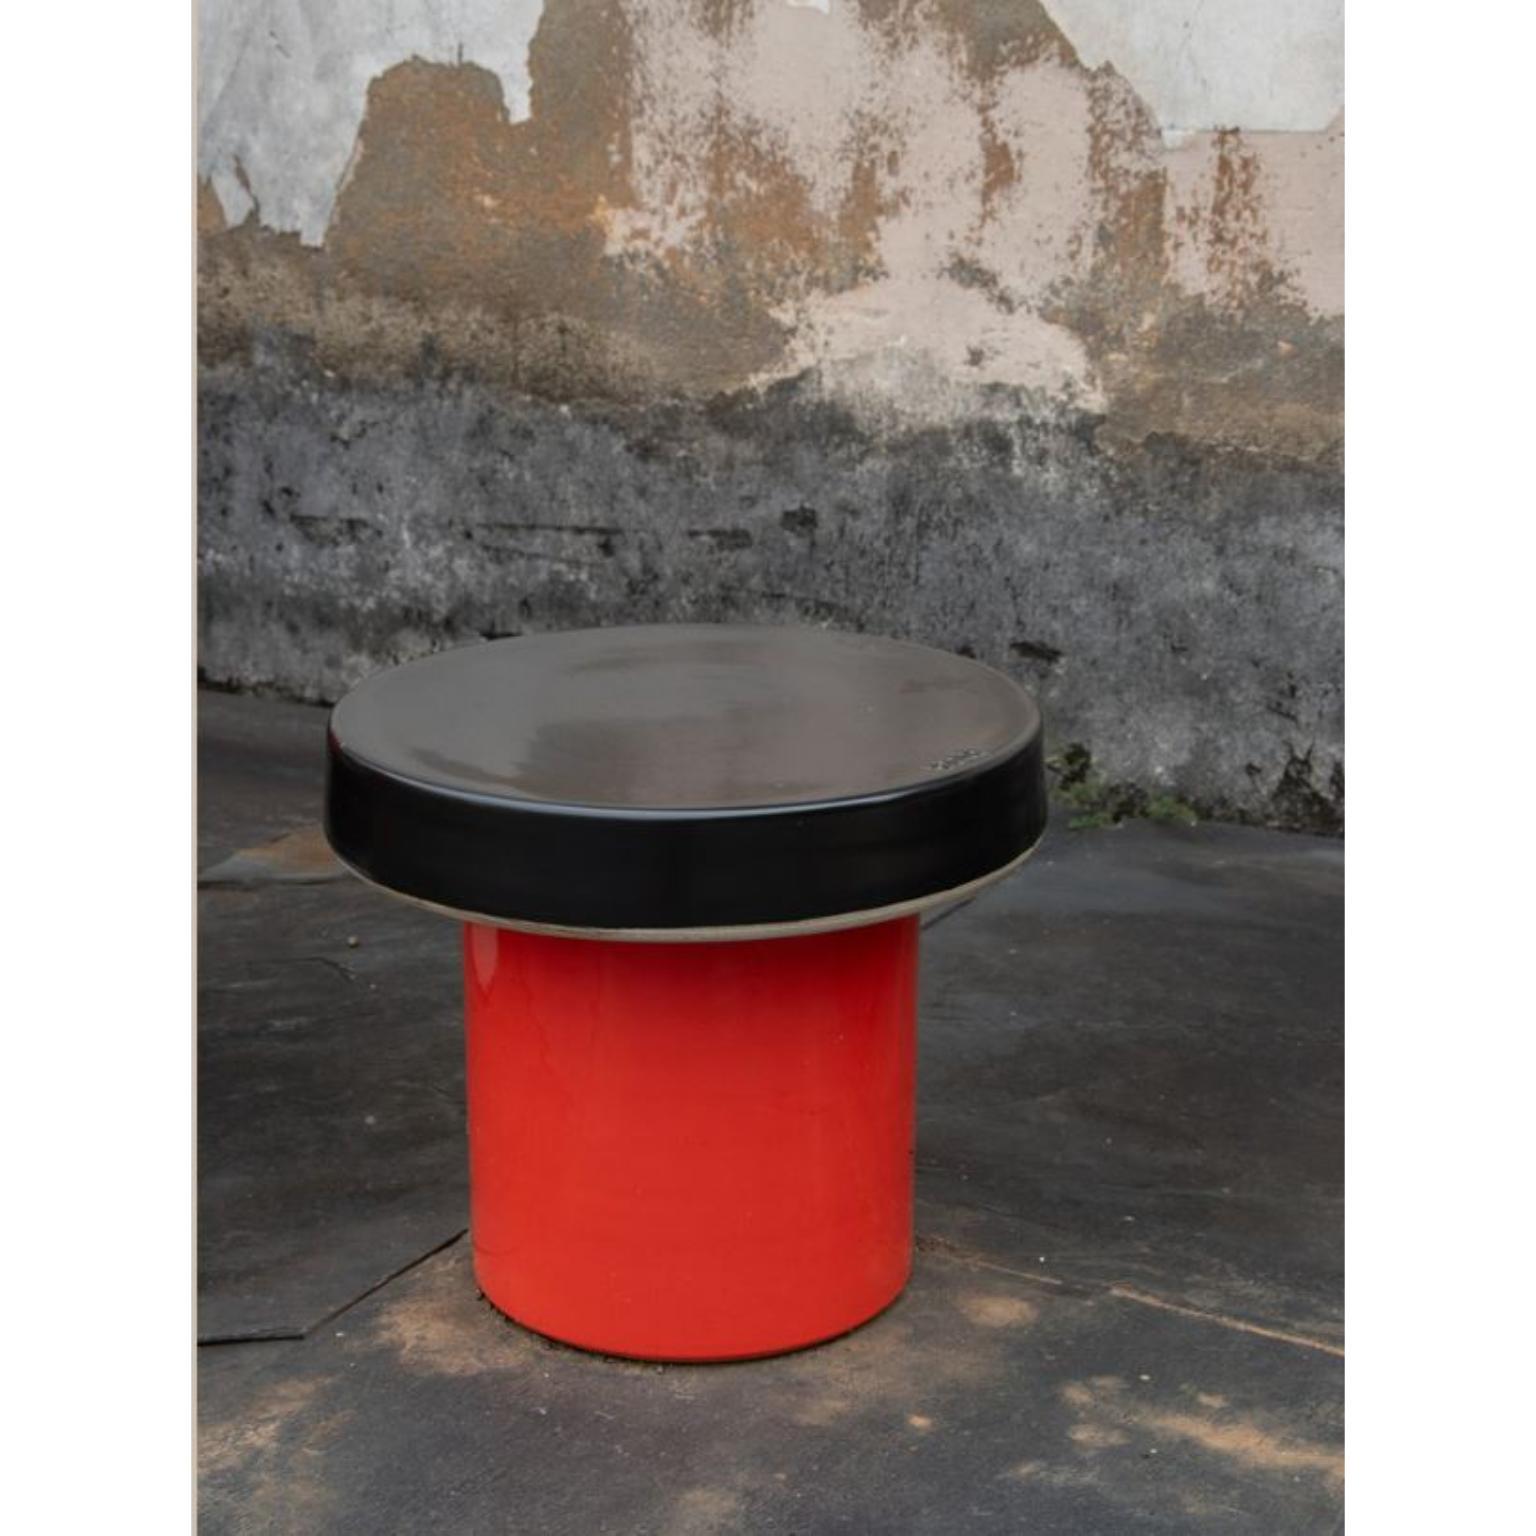 High Cap Side Table by WL Ceramics
Designer: Lex Pott
Materials: Porcelain
Dimensions: H50 x Ø45 cm

The CAP tables consist of two porcelain parts; a base and a table top. Each piece is thrown by hand and shows the blend between eastern and western